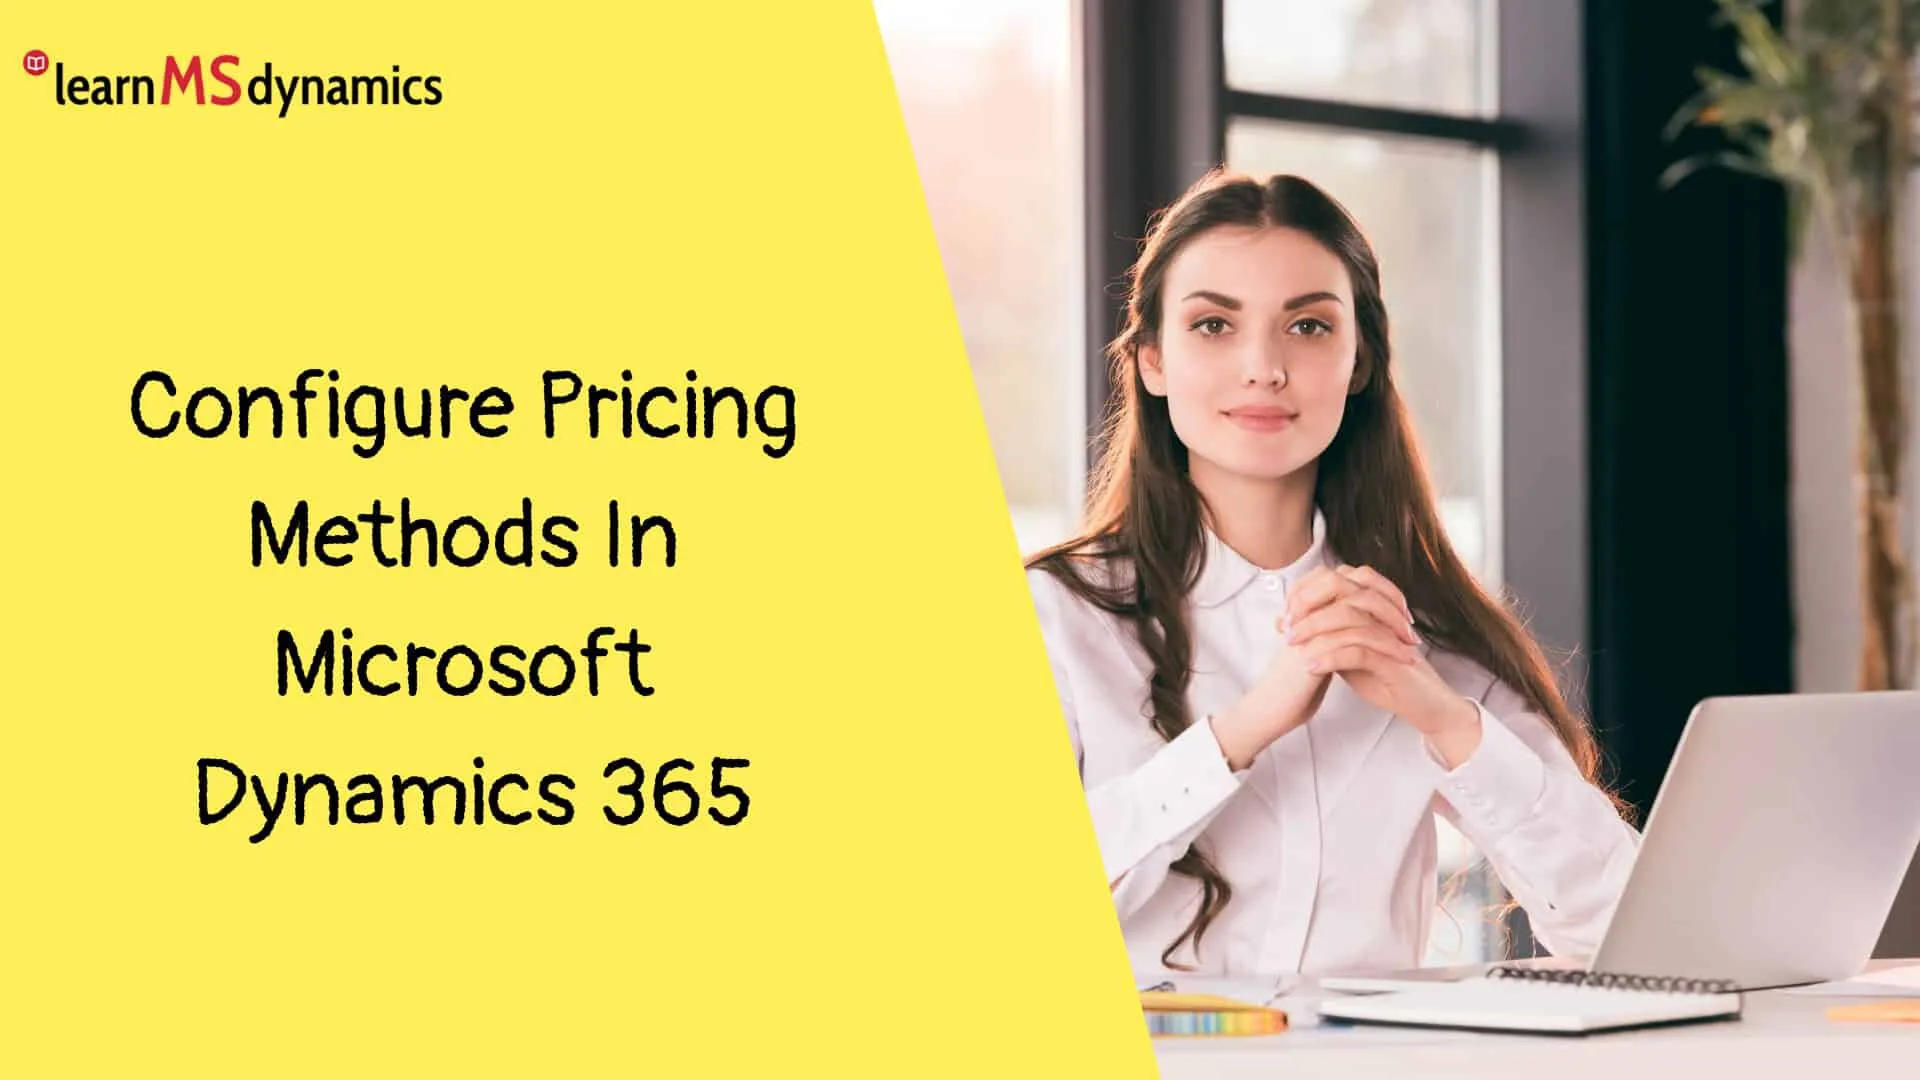 Configure Pricing Methods In Microsoft Dynamics 365